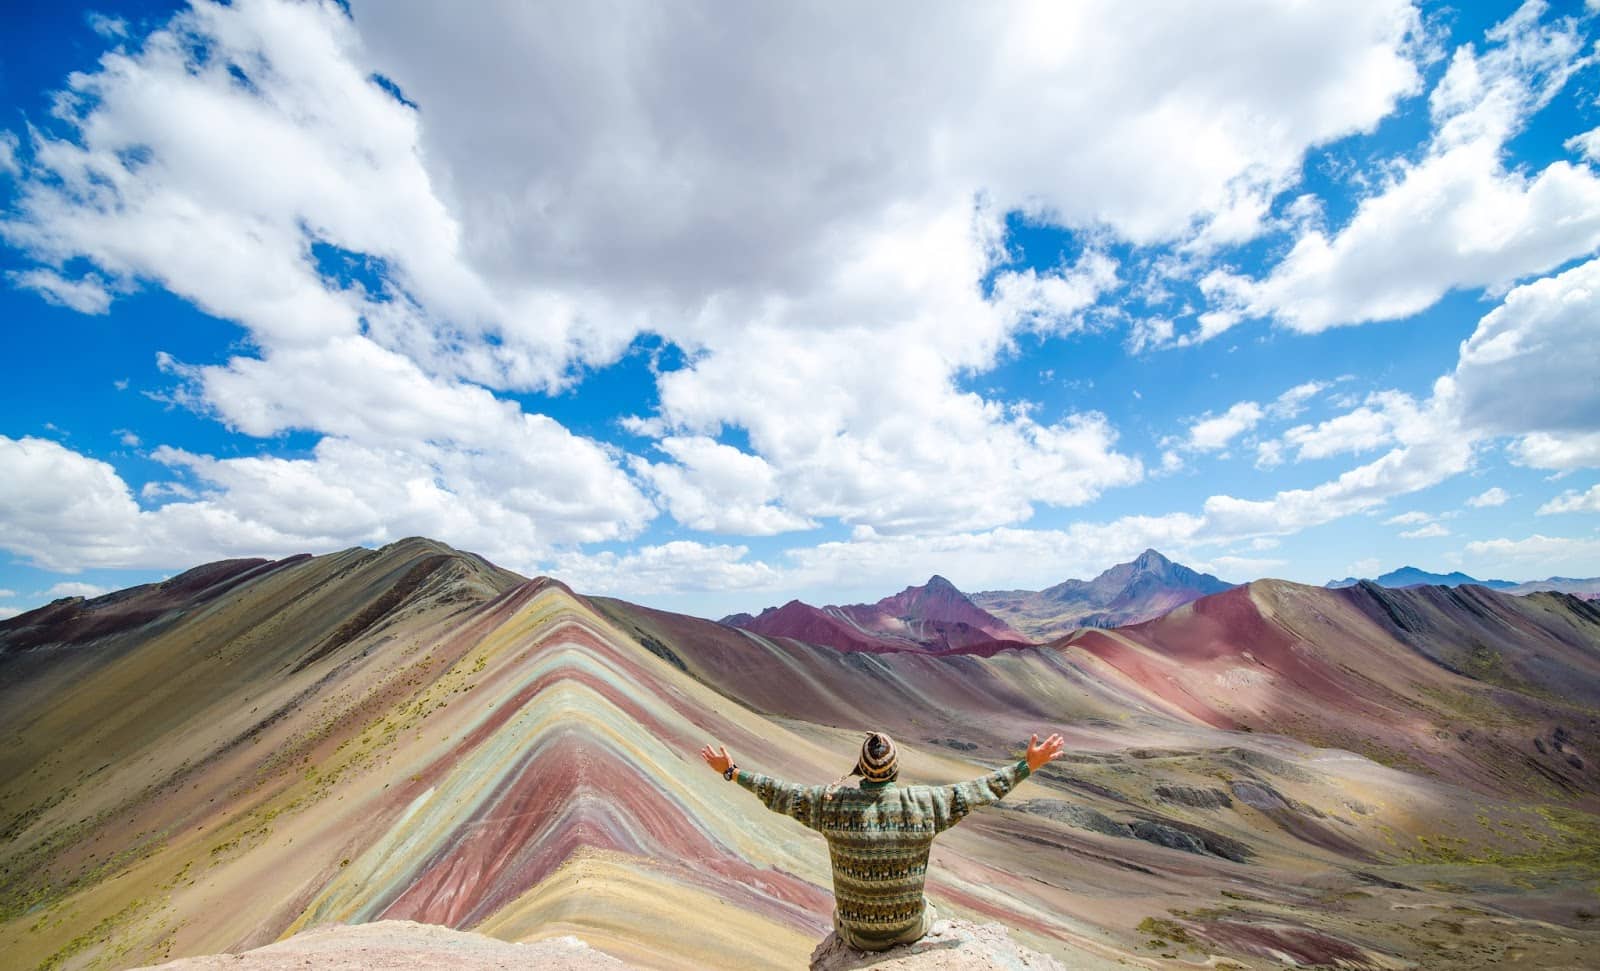 The Psychedelic Rainbow Mountains Of Peru Are Breathtaking - Sociedelic